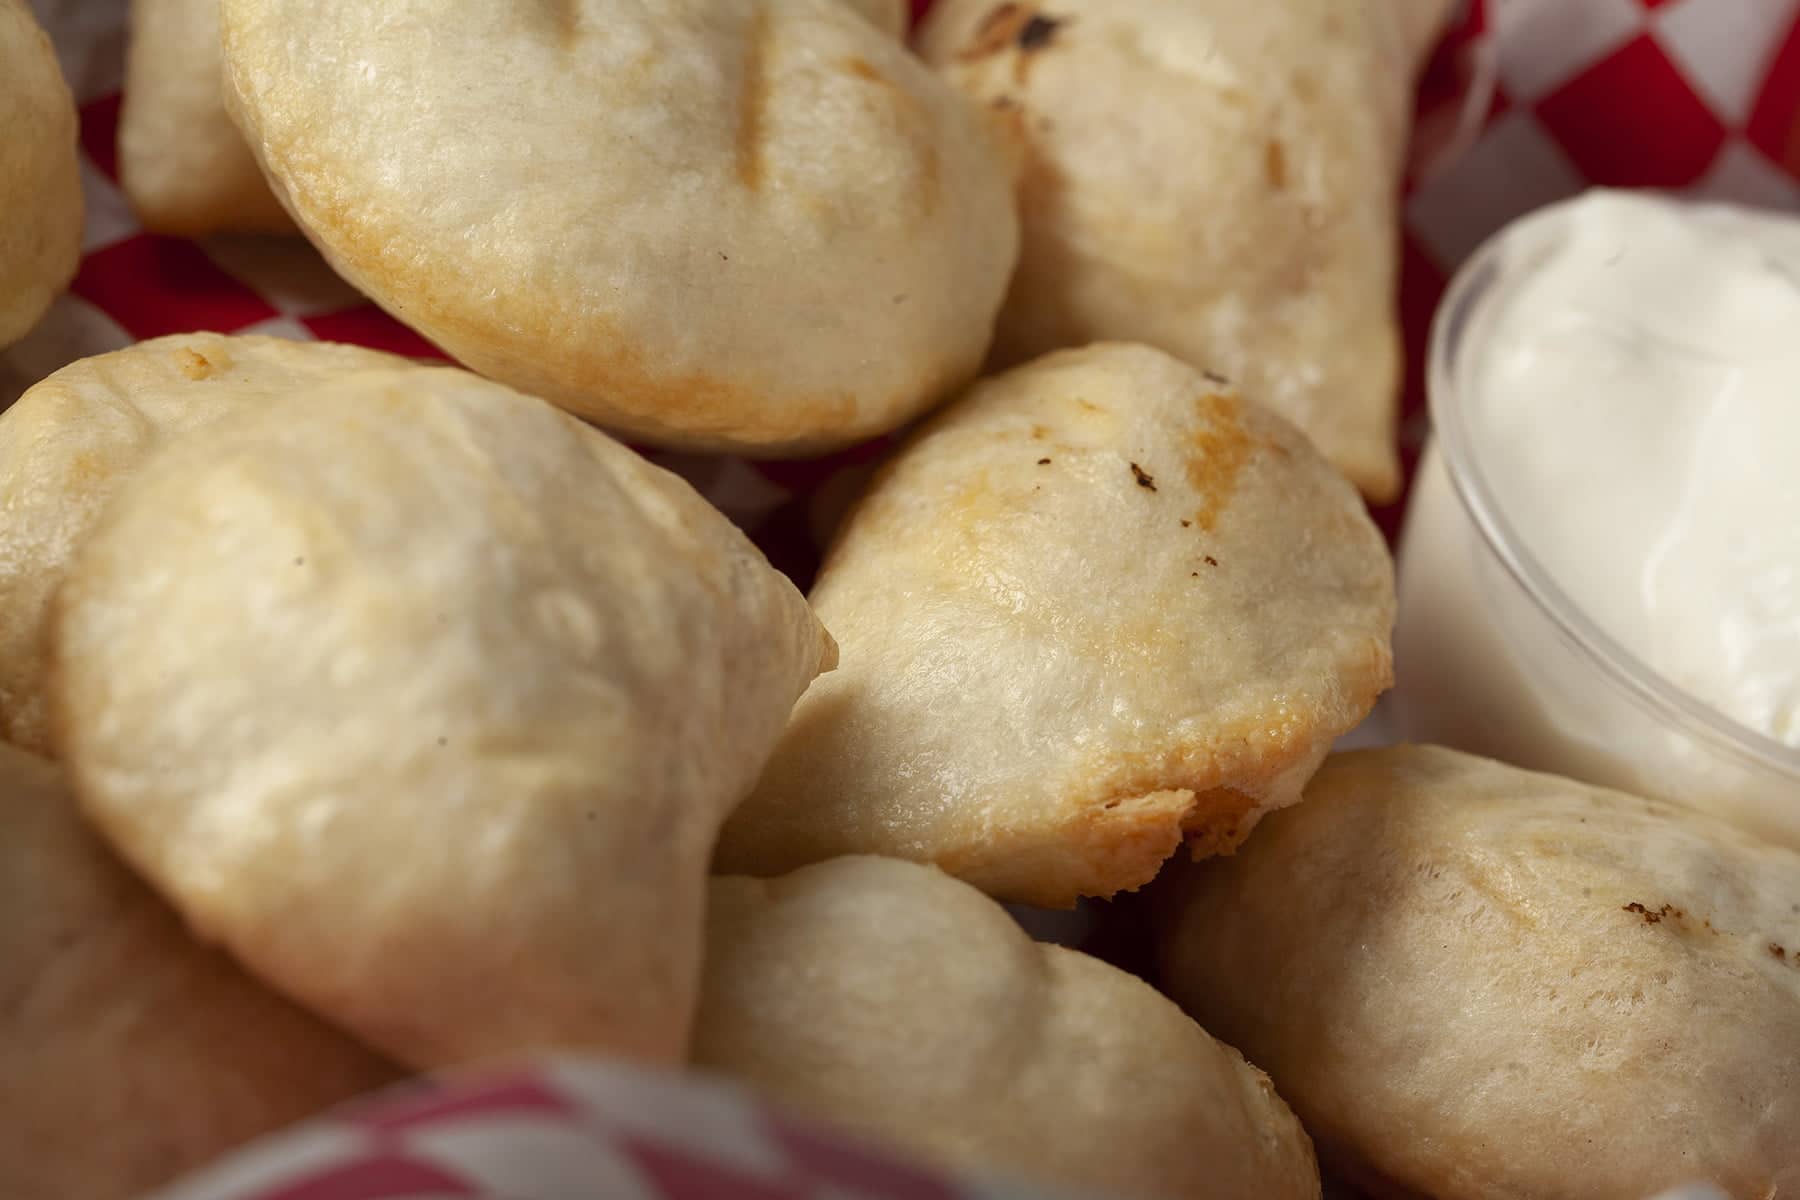 Perfectly cooked perogies are mounded in a red basket, accompanied by a small bowl of sour cream.